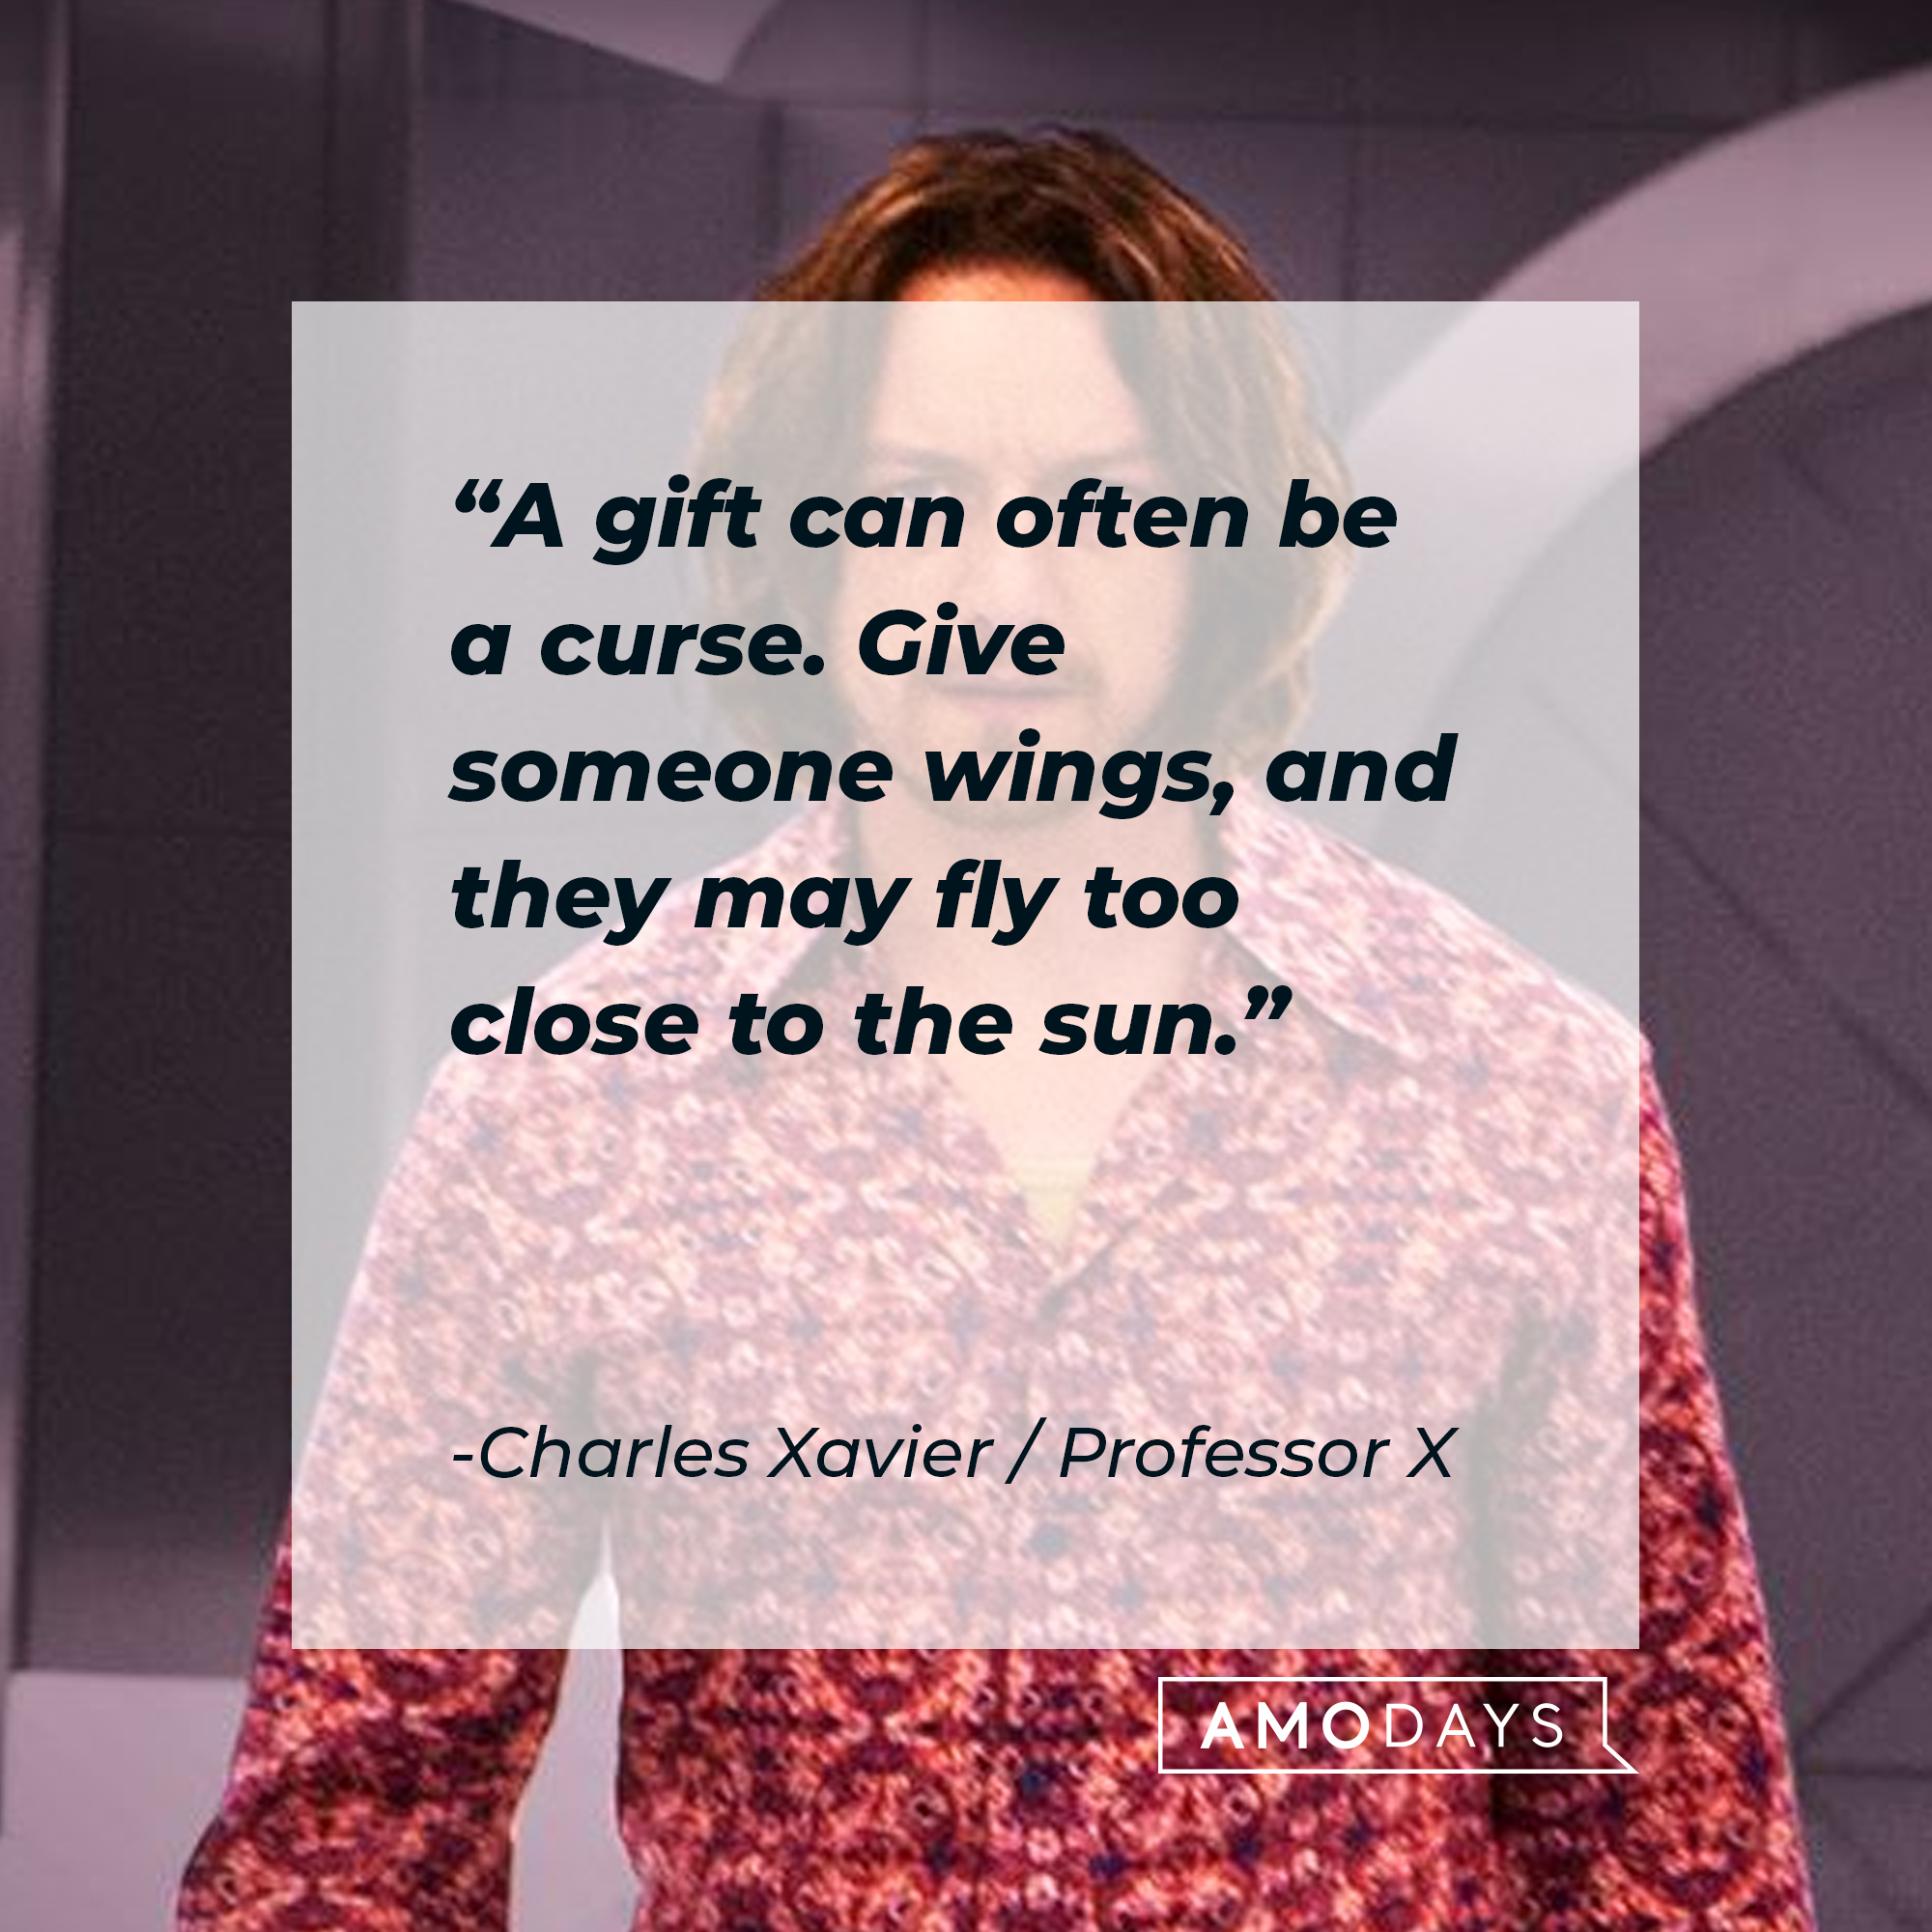 An image of a young Charles Xavier / Professor X, with his quote: “A gift can often be a curse. Give someone wings, and they may fly too close to the sun.” | Source: Facebook.com/xmenmovies